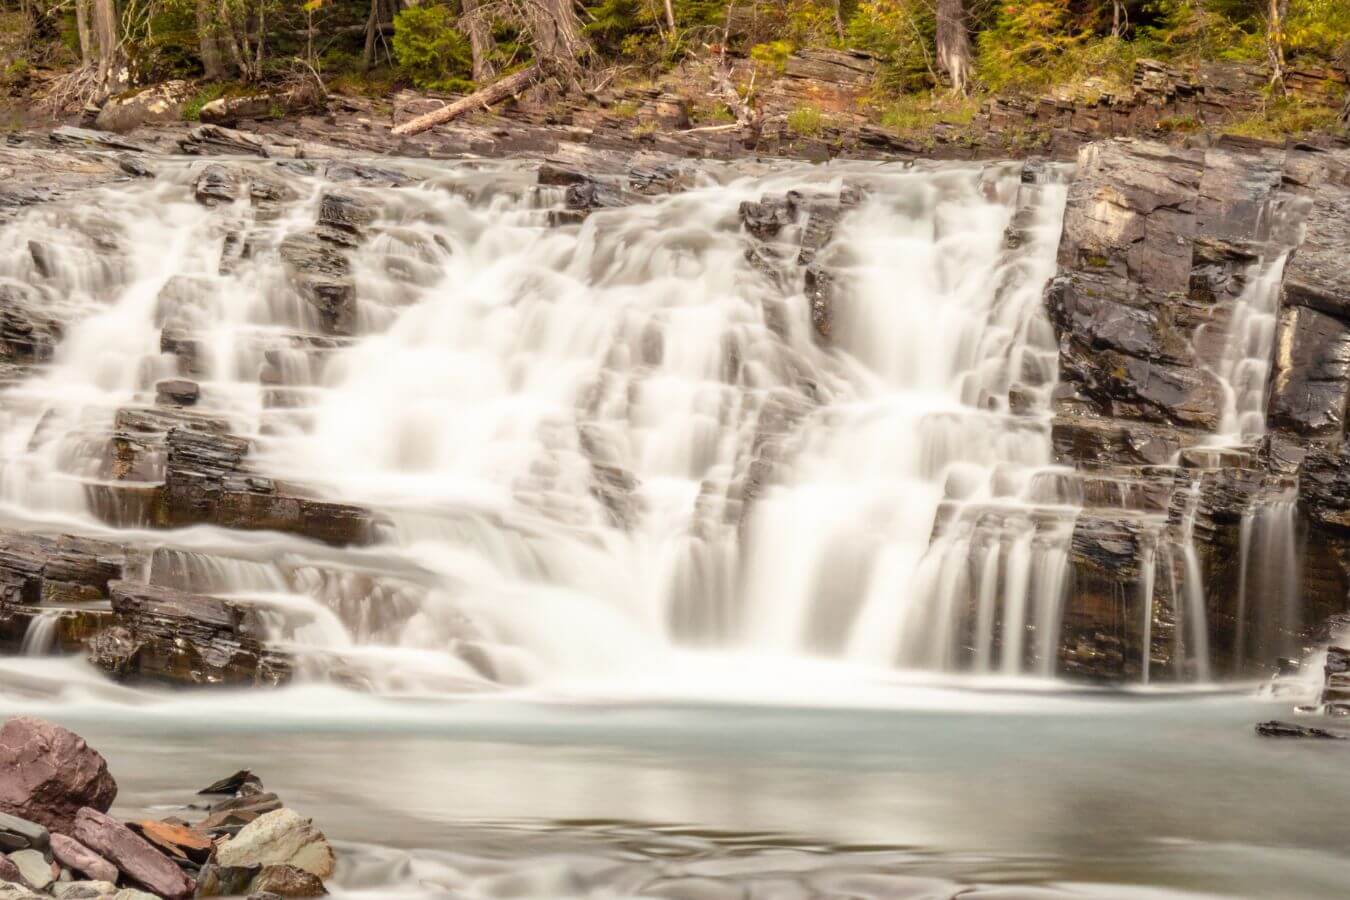 Sacred Dancing Cascade flows over tiered, rocky ledges surrounded by forested banks.